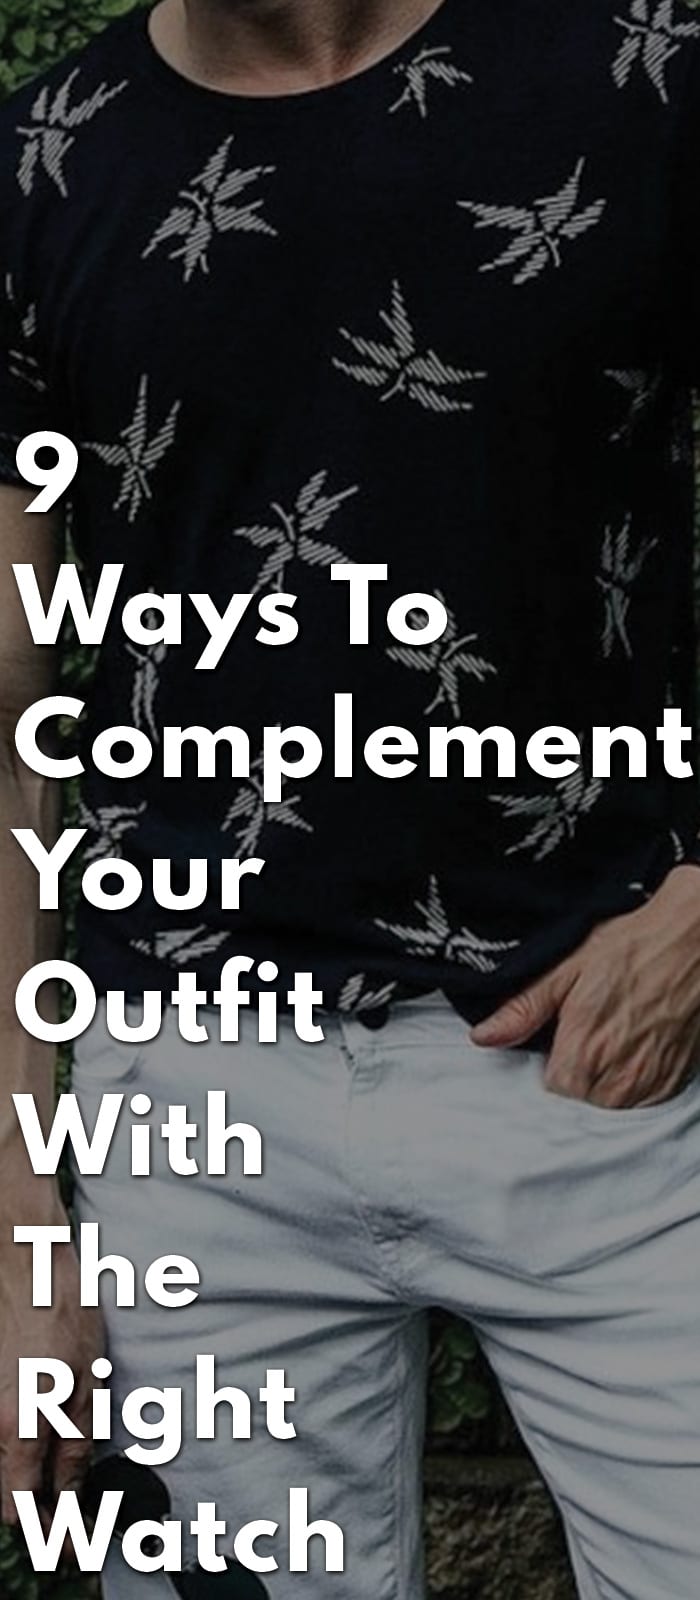 9-Ways-to-Complement-Your-Outfit-With-the-Right-Watch